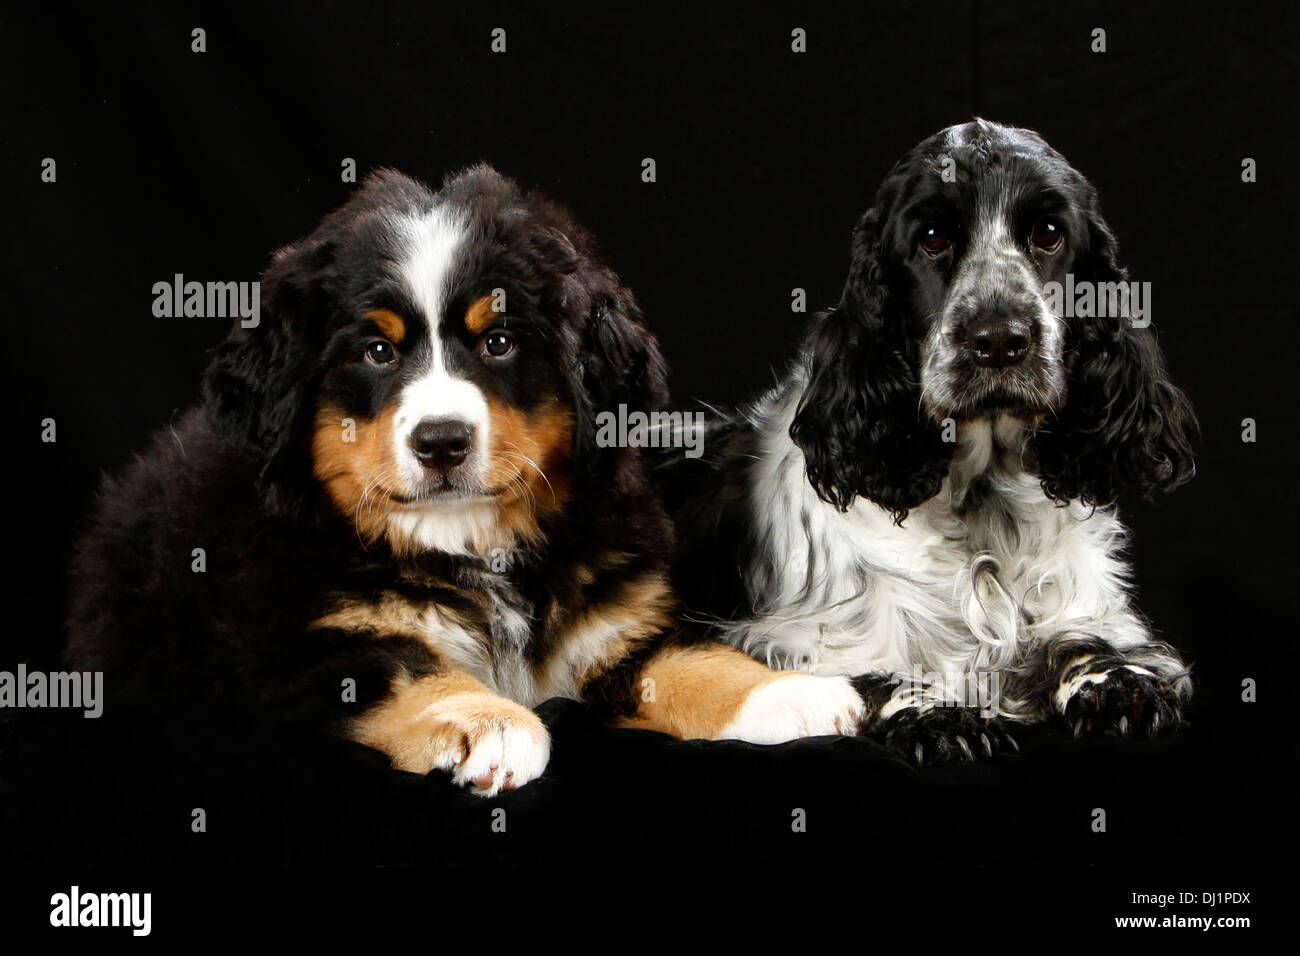 Bernese Mountain Dog Puppy nine weeks old laying next to Cocker Spaniel Studio picture against black background Stock Photo